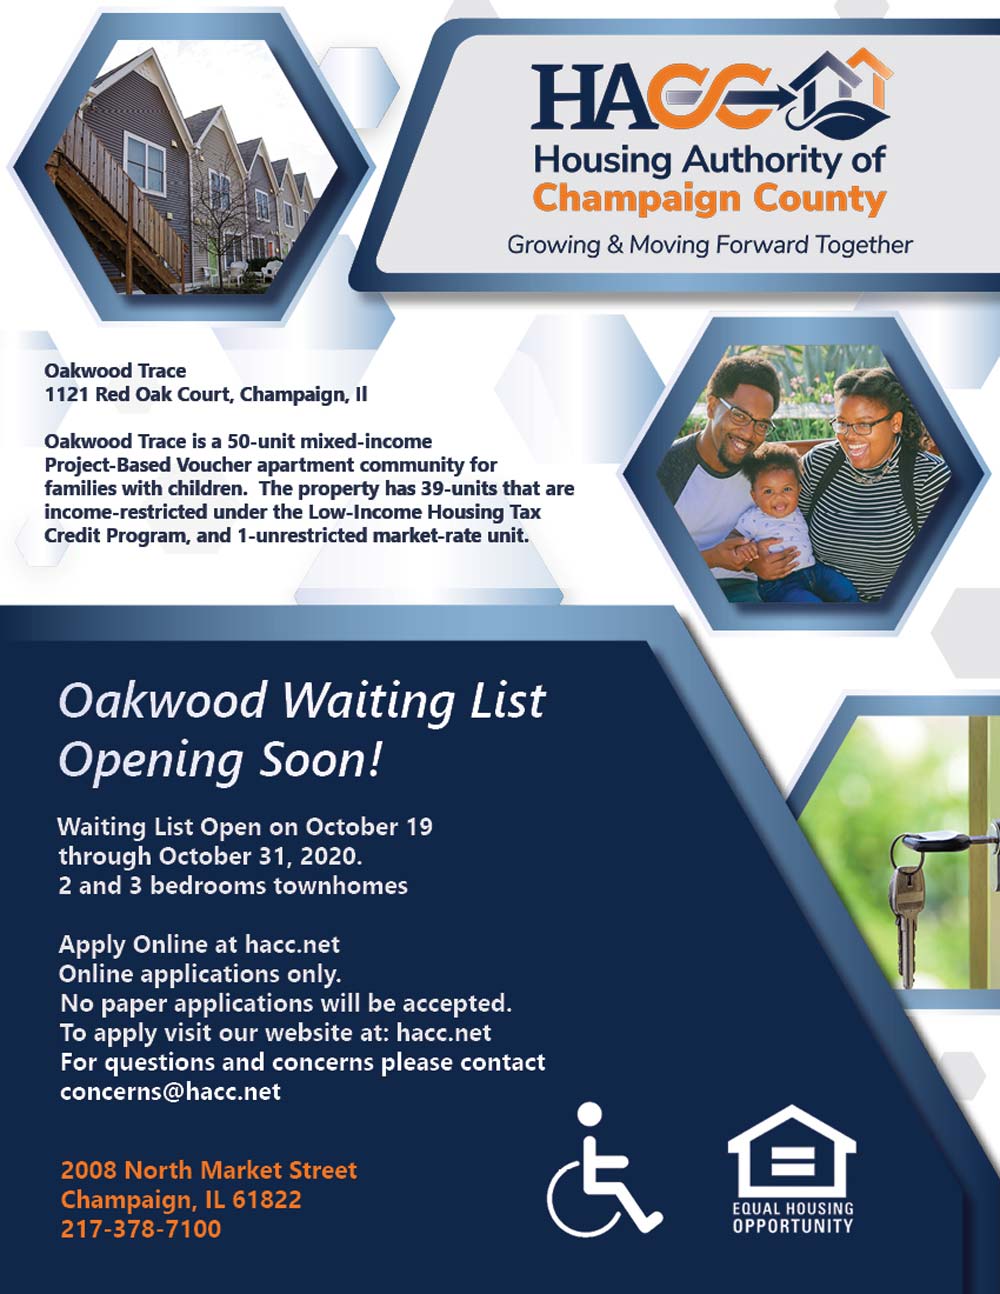 Oakwood Trace Waiting List flyer, all information as listed below.